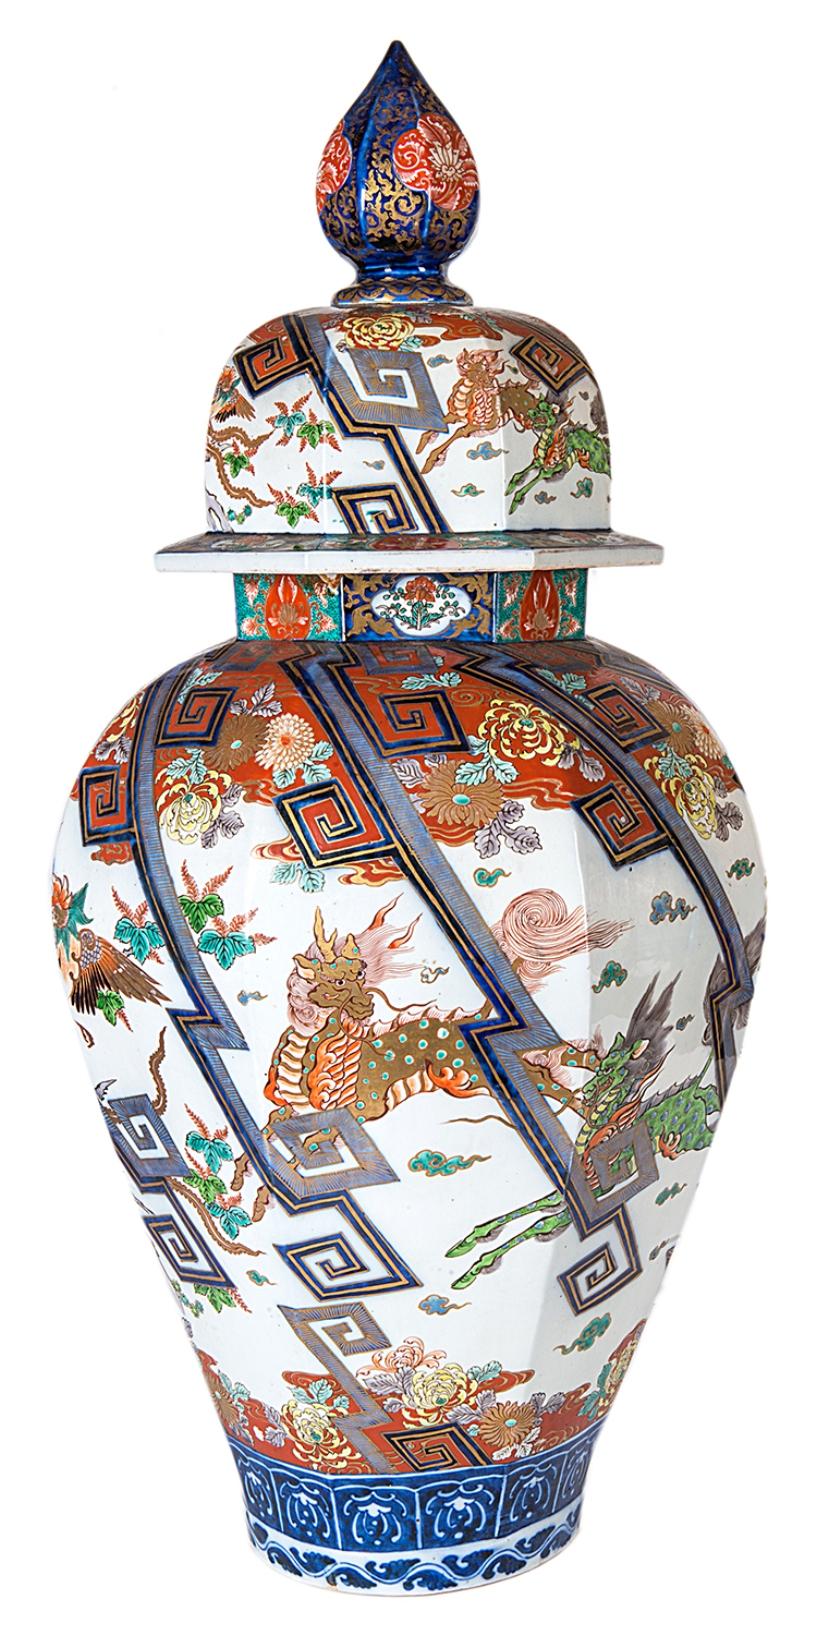 A very good quality 19th century Japanese Imari lidded vase, having mythical, horses, dogs of faux and exotic birds amongst geometric diagonal panels and boarders of flowers and foliage.